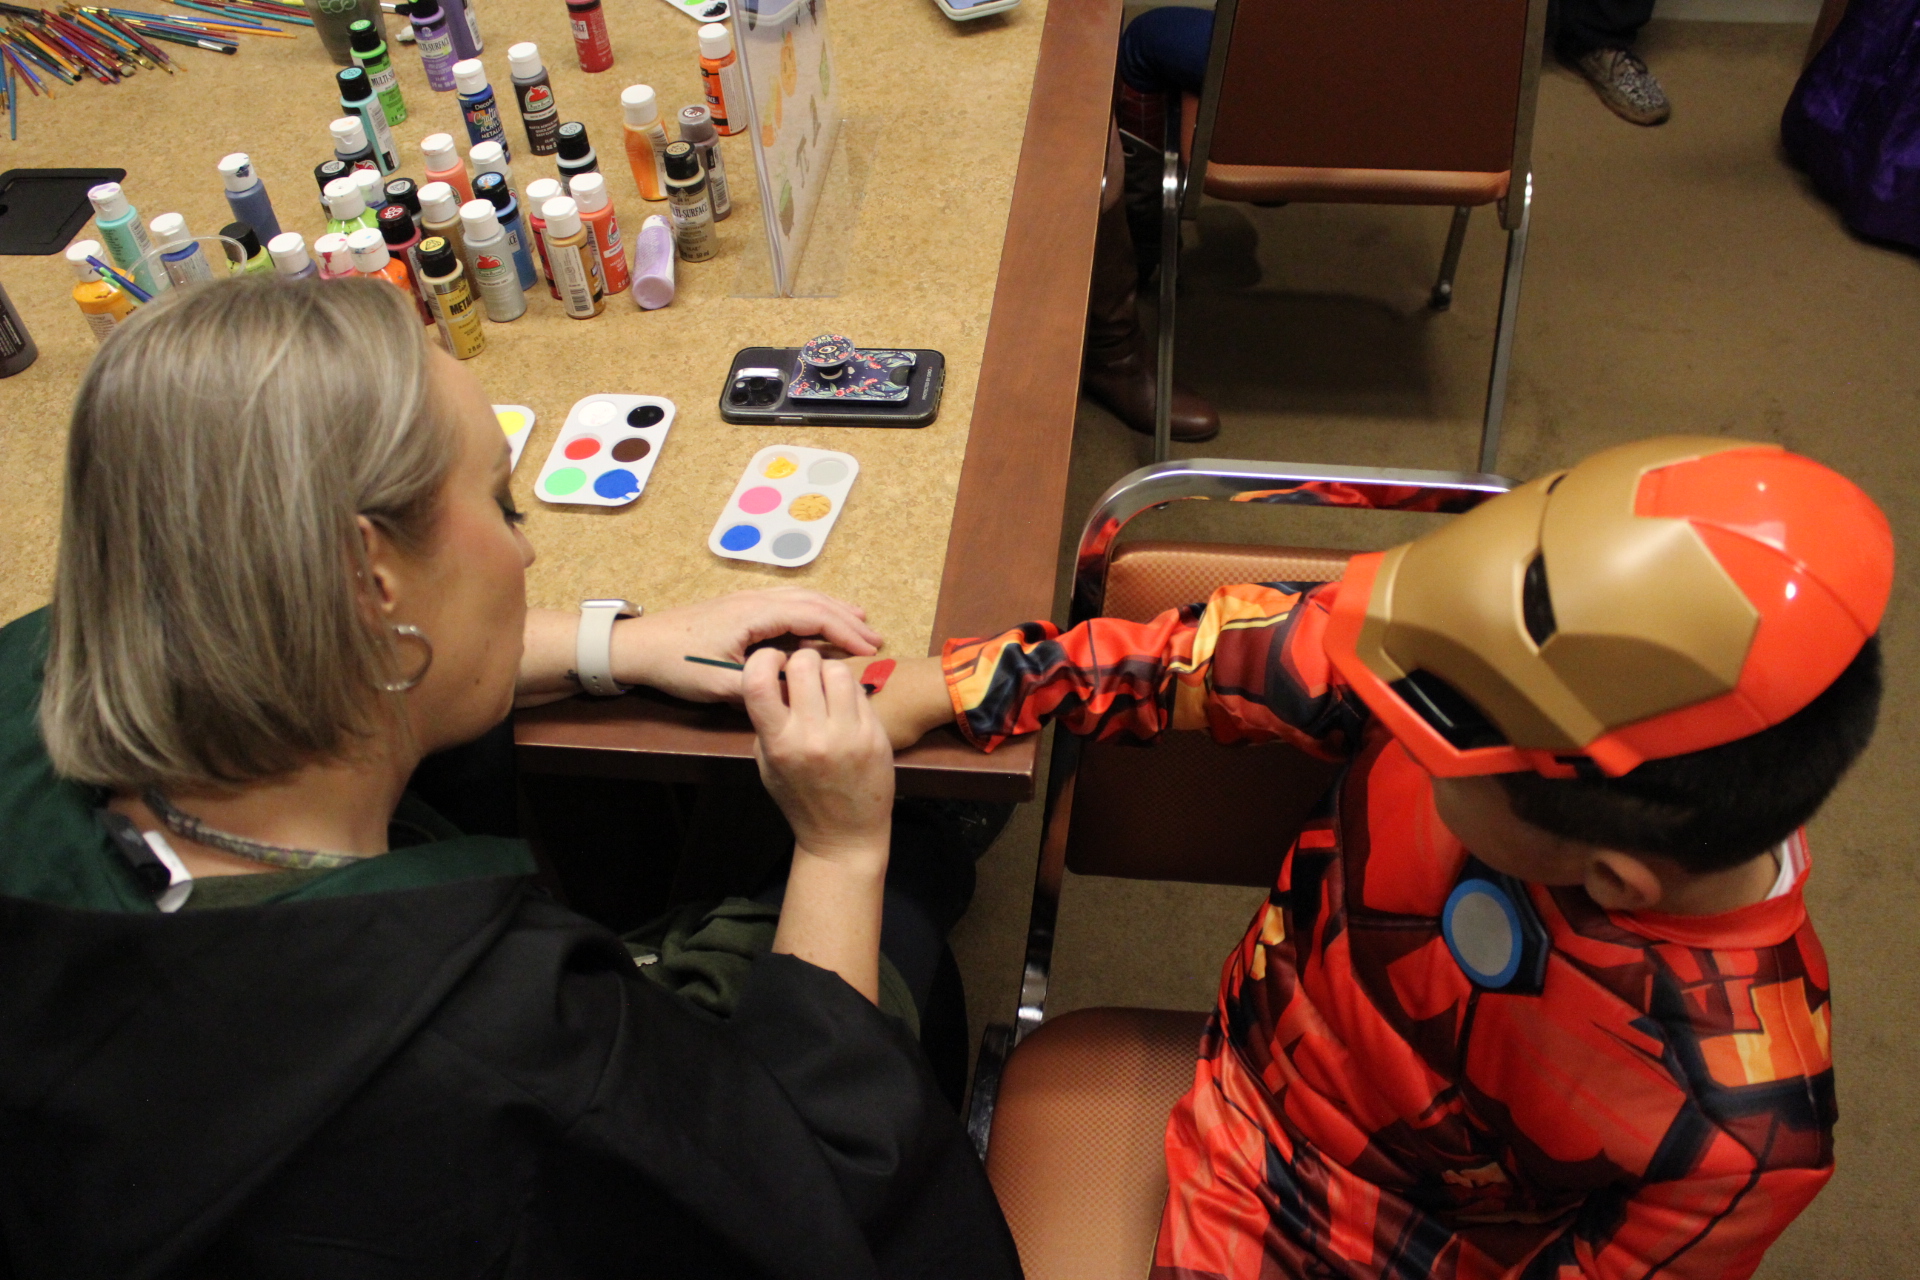 Library Executive Director Jasmyne painting costumed child's hand